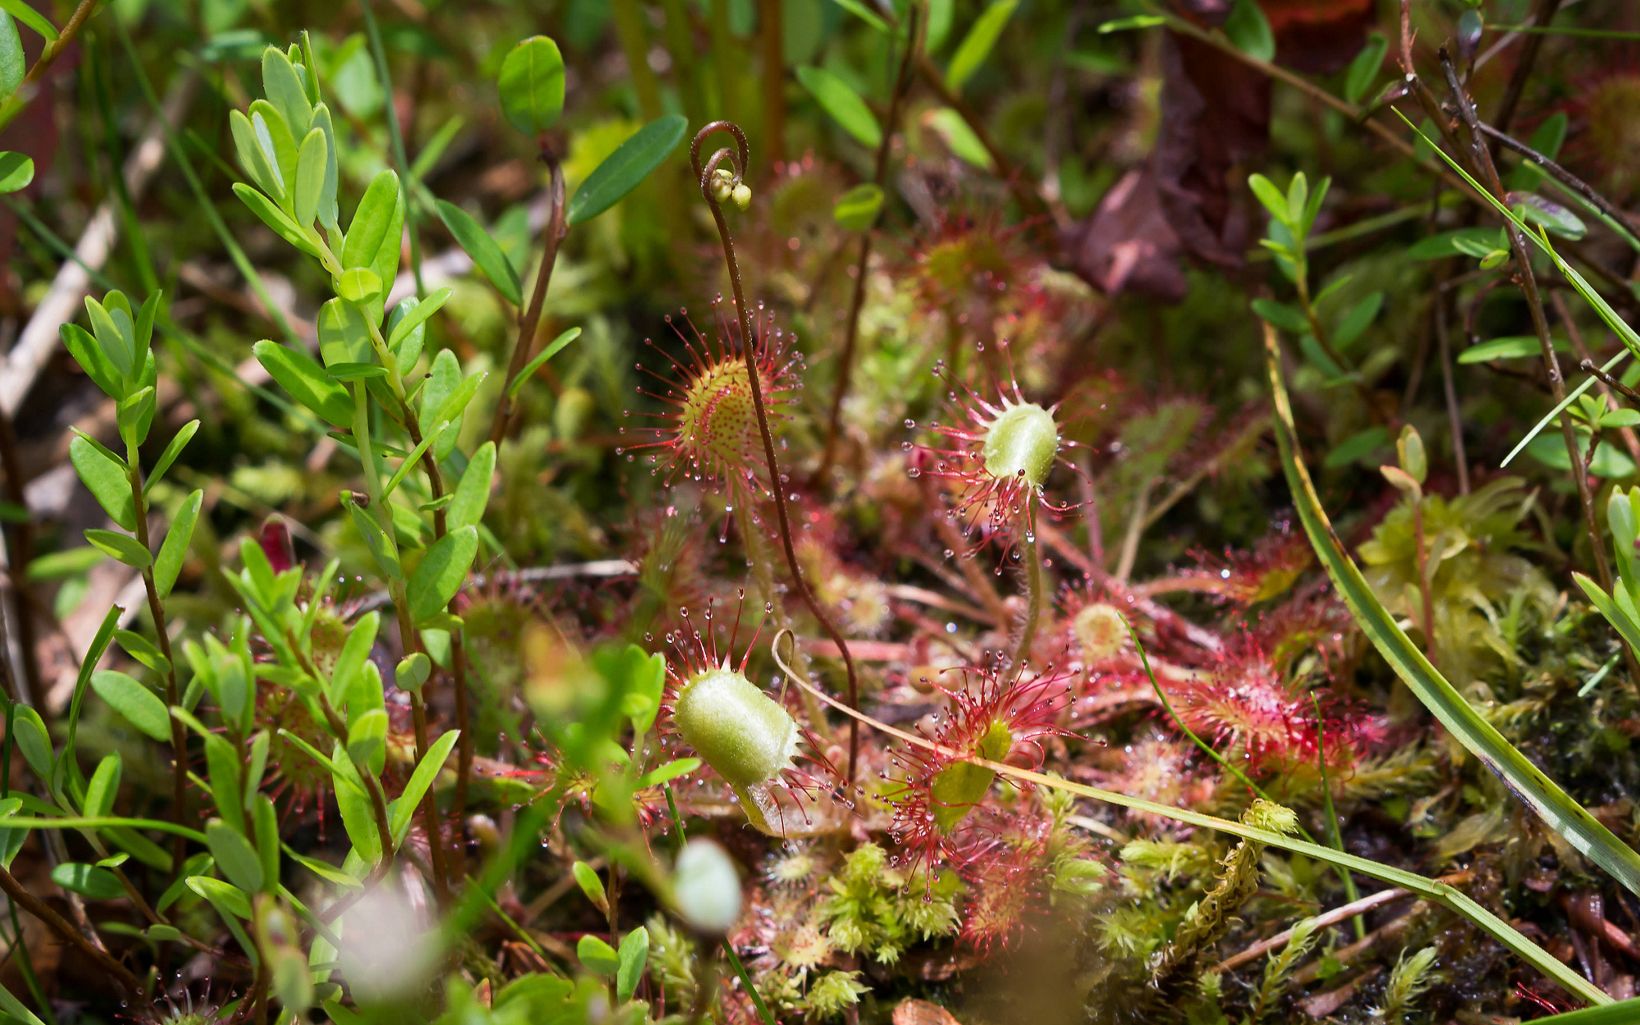 (Drosera rotundifolia) One of Ohio's carnivorous plants, it attracts and digests its prey with the sticky substance on its leaves.